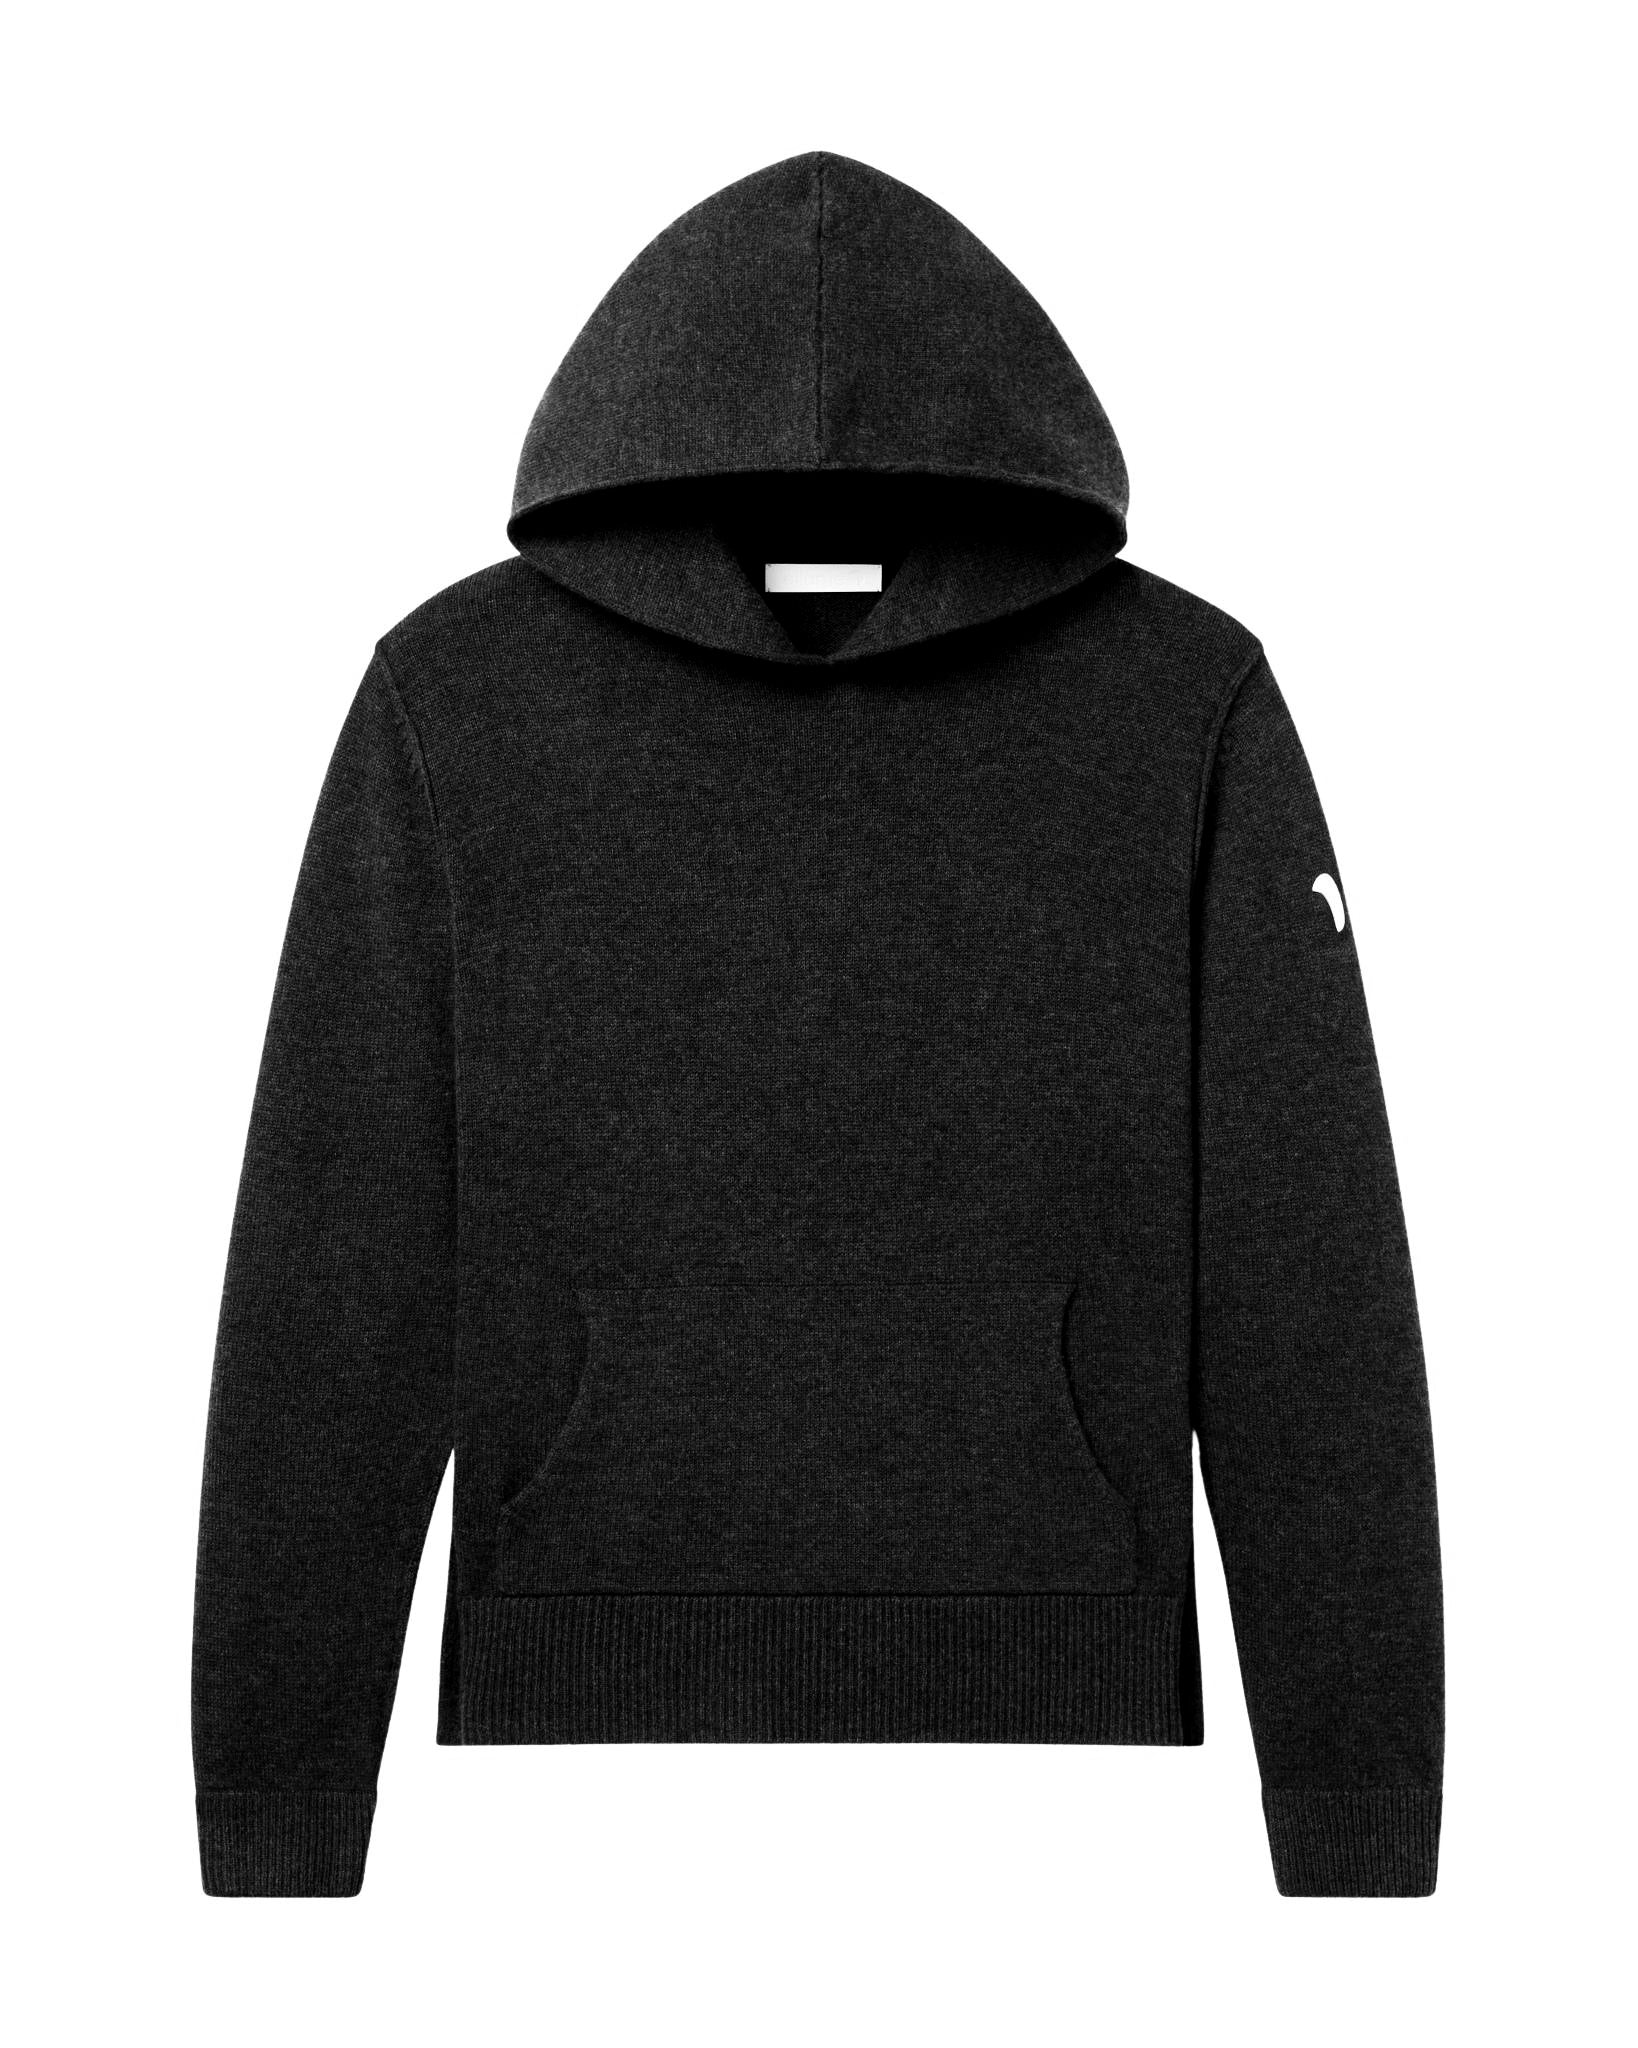 allume Recycled Cashmere Black CS—02 Hoodie Black Knitwear